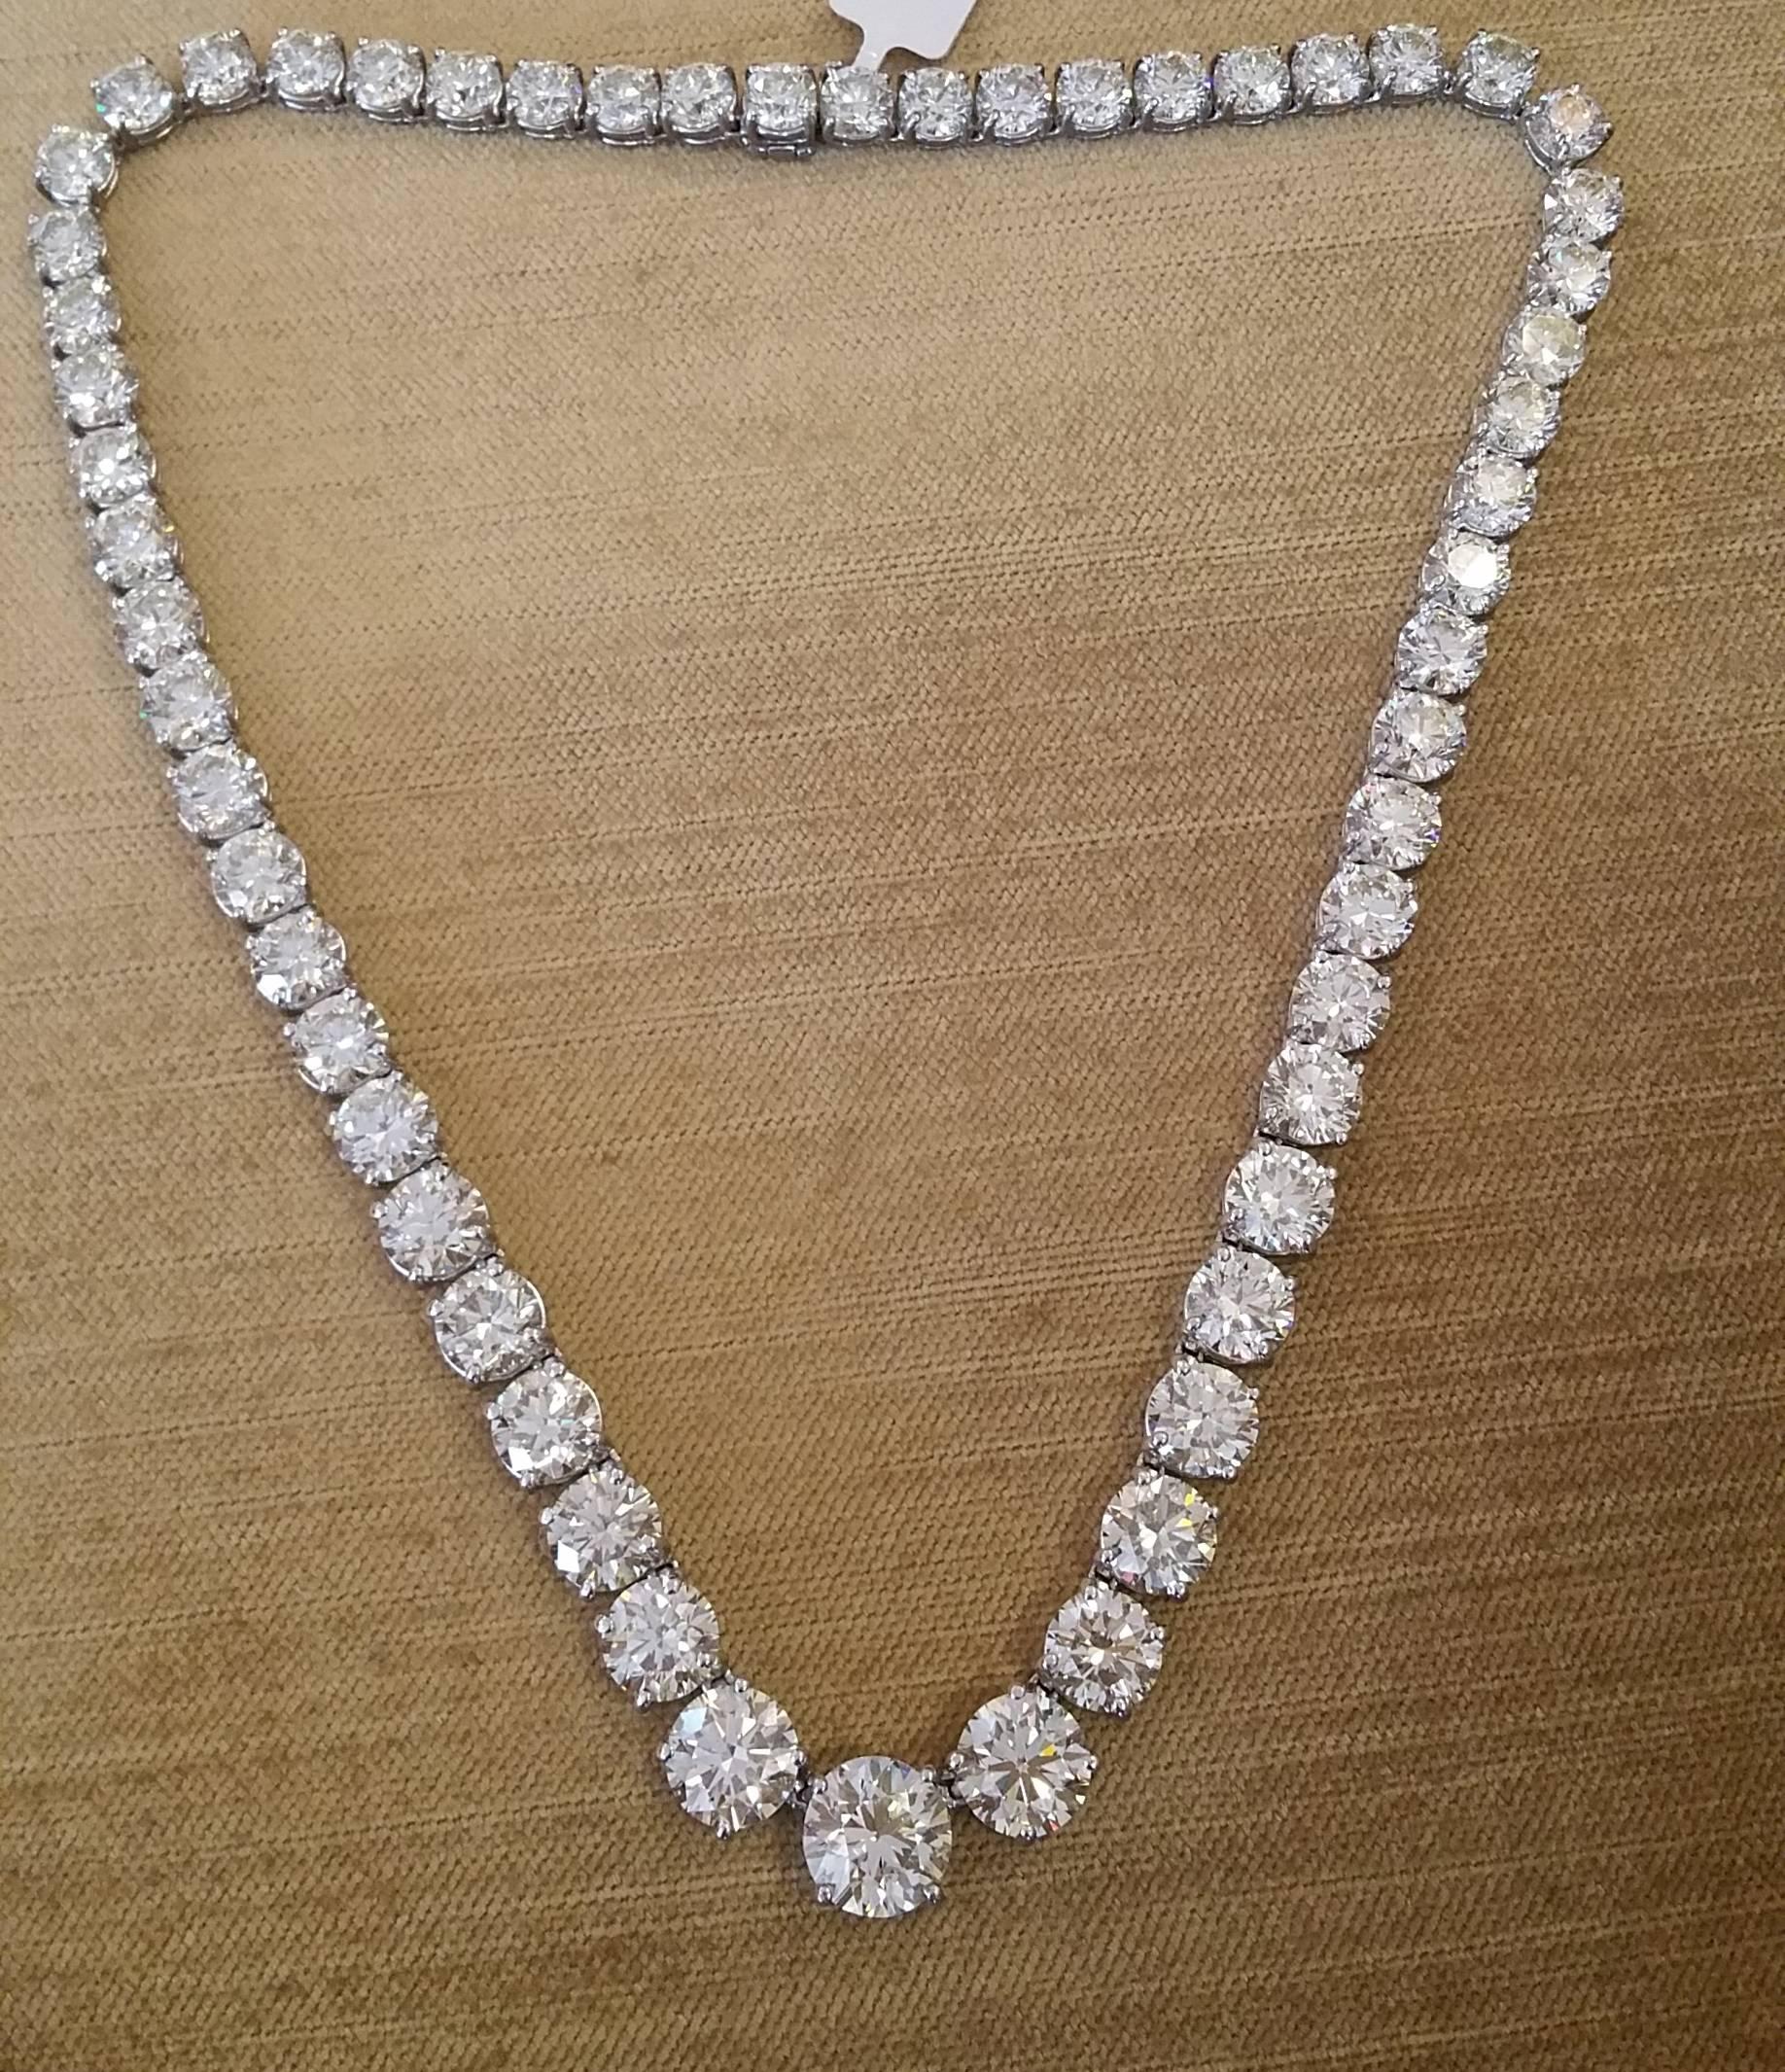 Diamond riviere necklace features 57 round brilliant cut diamonds with center diamond weighing 4.14 carats.  Diamonds are individually prong set in a graduated style. Diamond total weight is 83.75 carats. 
Diamond quality is graded as estimated O-P